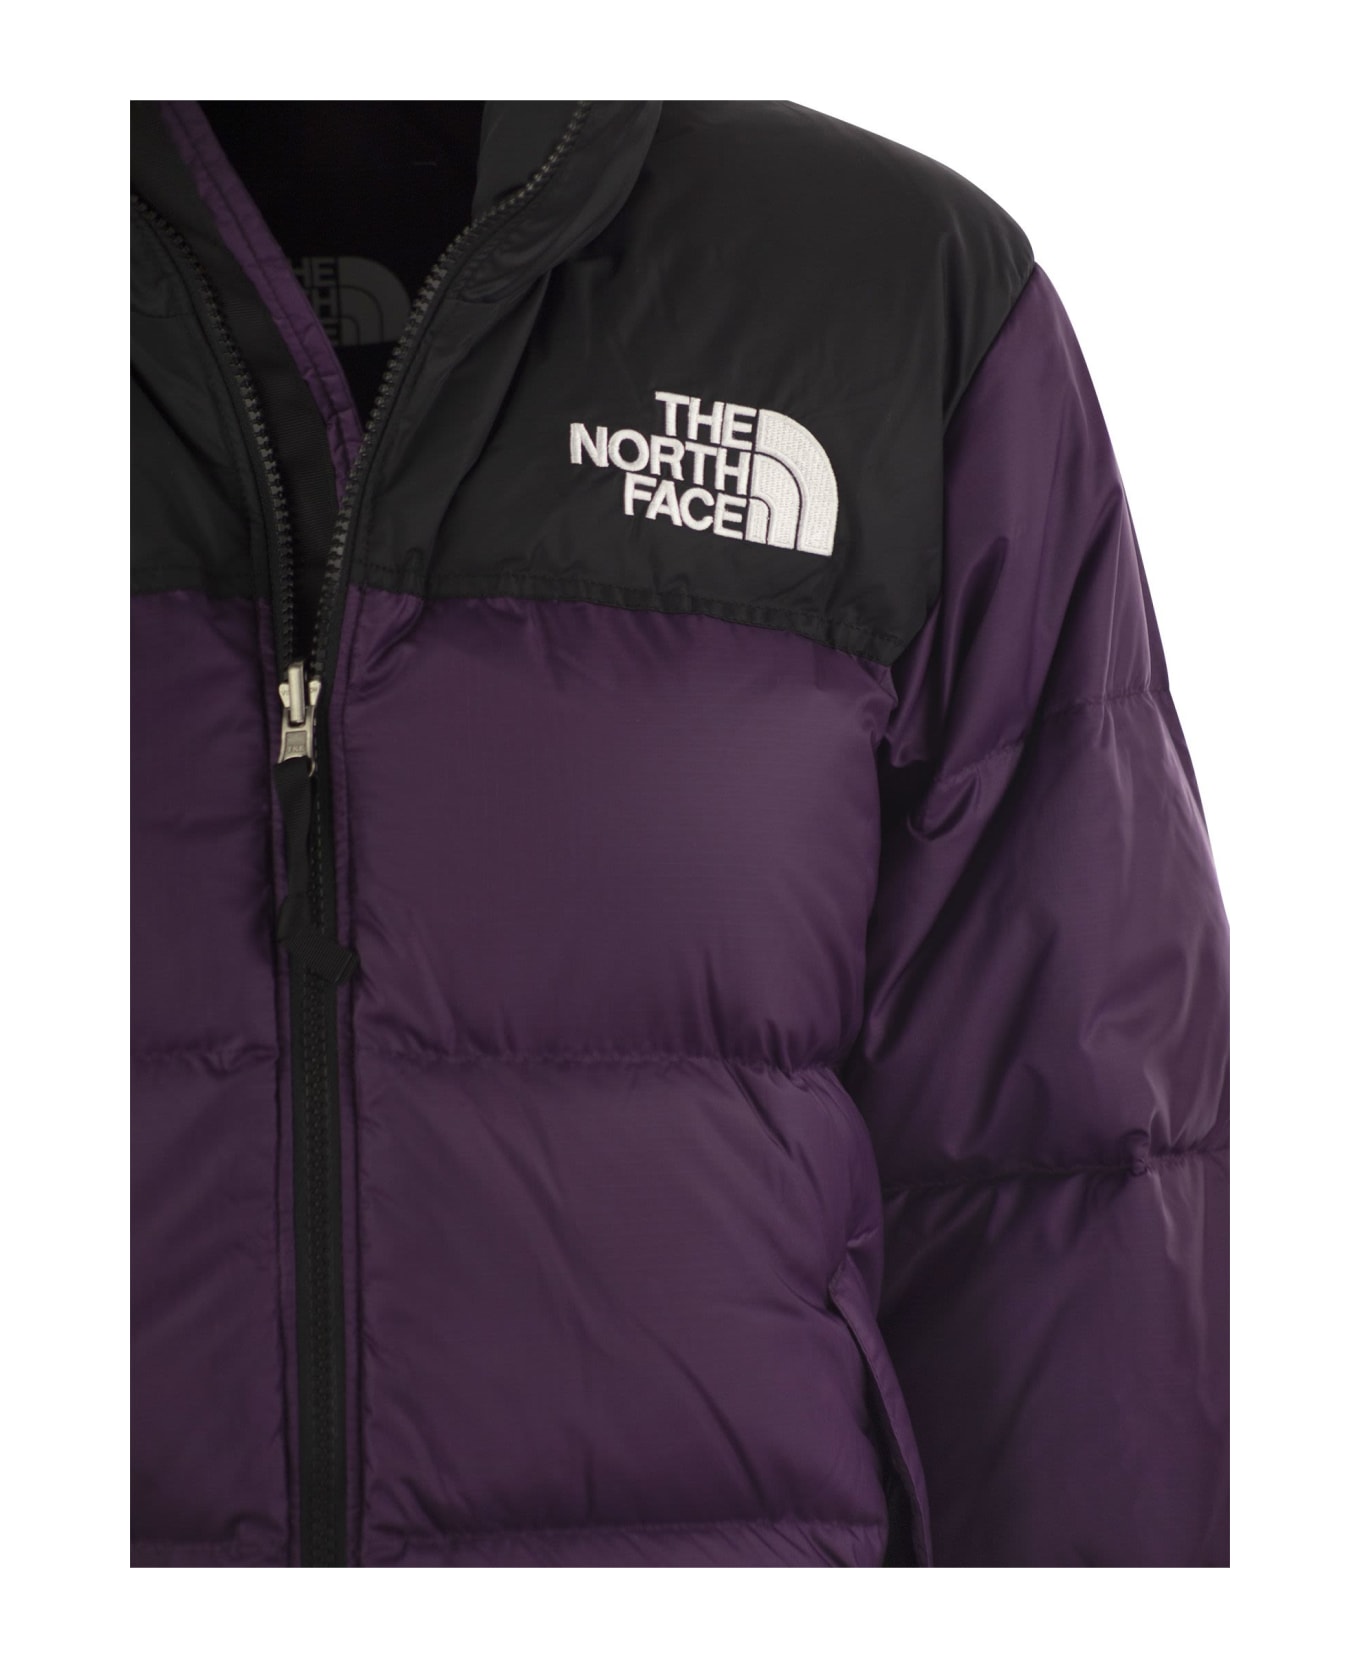 The North Face Retro 1996 - Two-tone Down Jacket